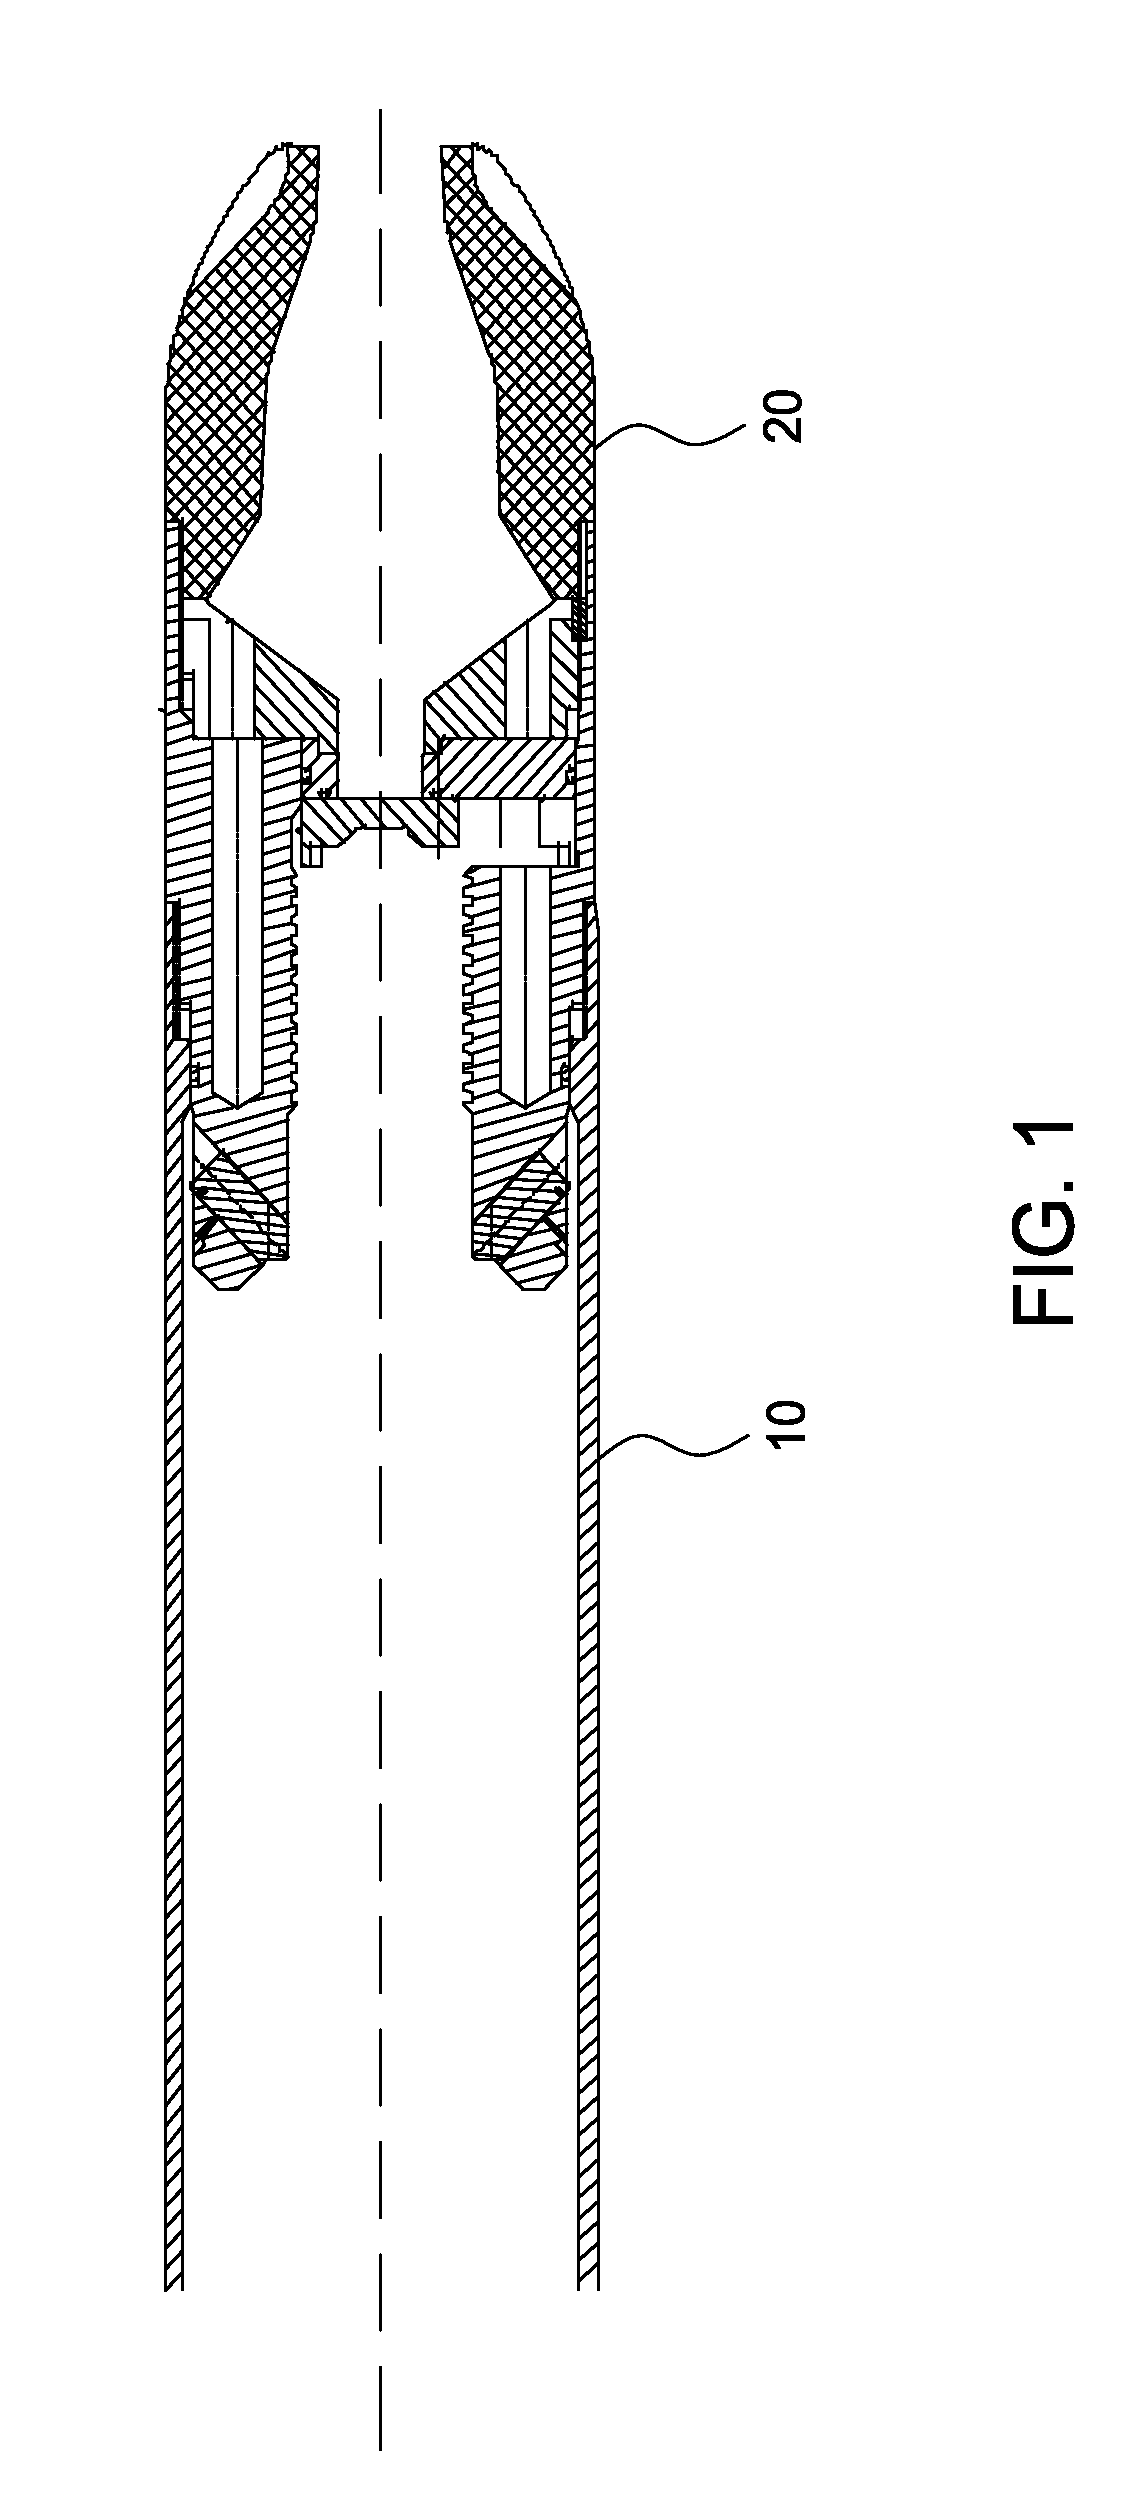 Apparatus and methods of milling a restricted casing shoe